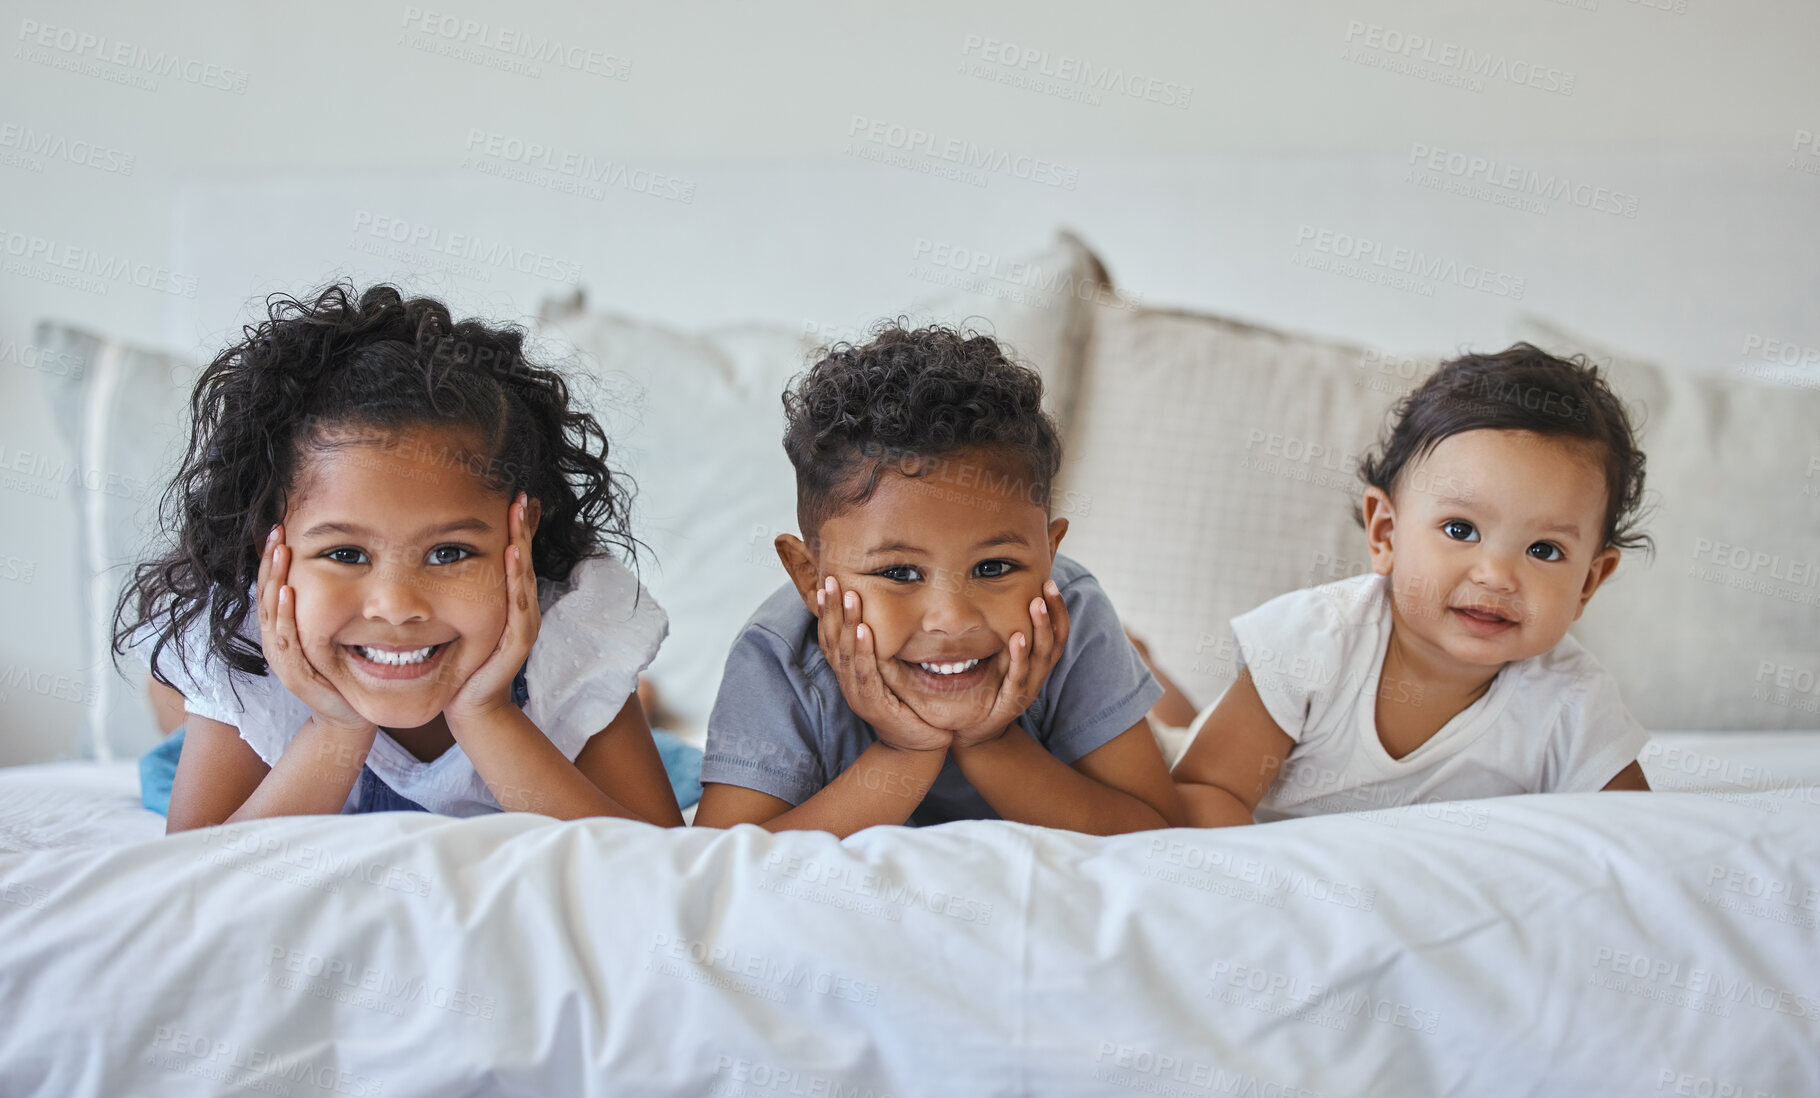 Buy stock photo Shot of three siblings lying together in bed